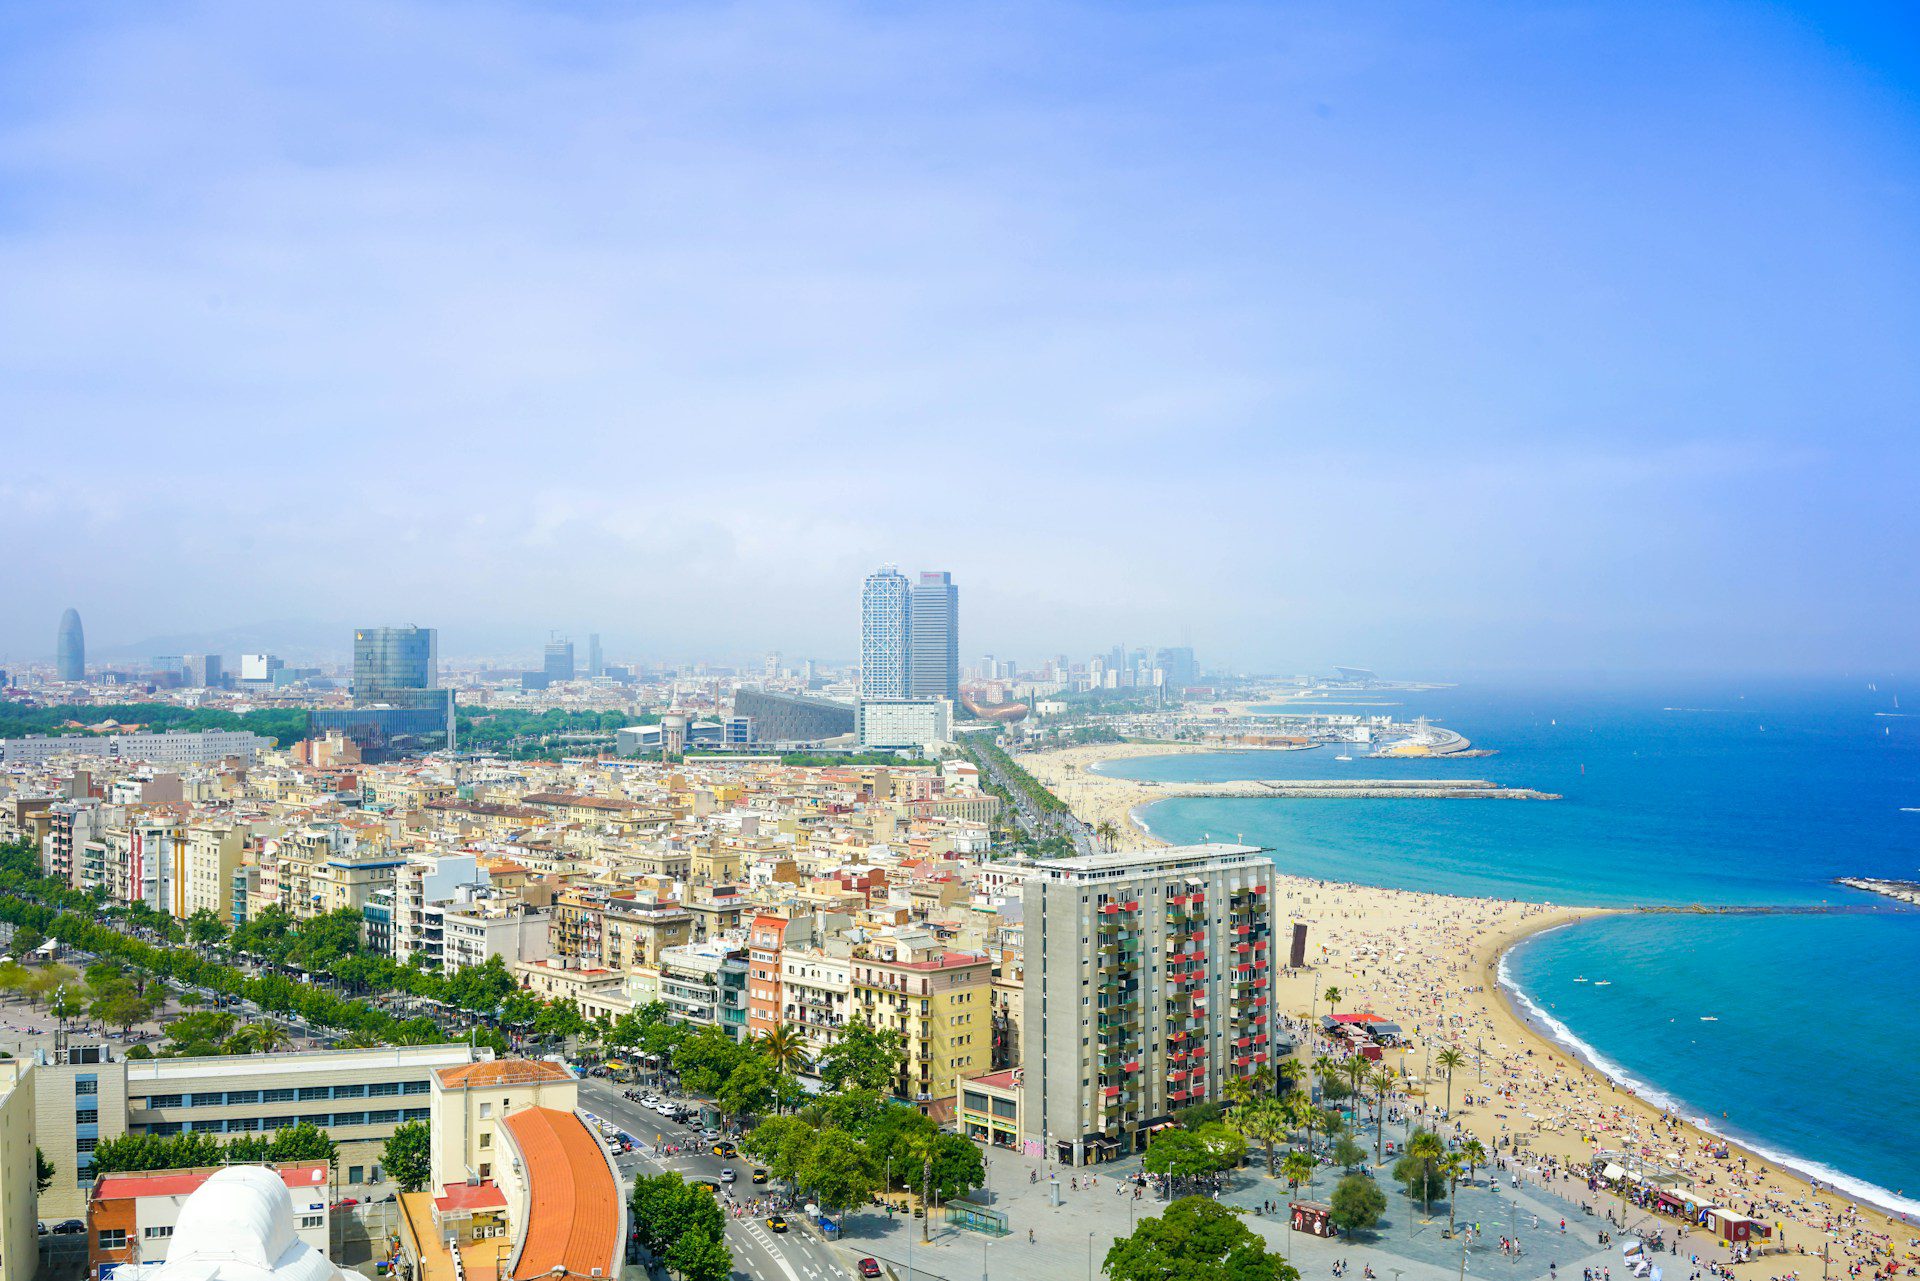 View of Barcelona City Beach, with skyscrapers on the left and a long stretch of sand meeting a blue sea on the right.